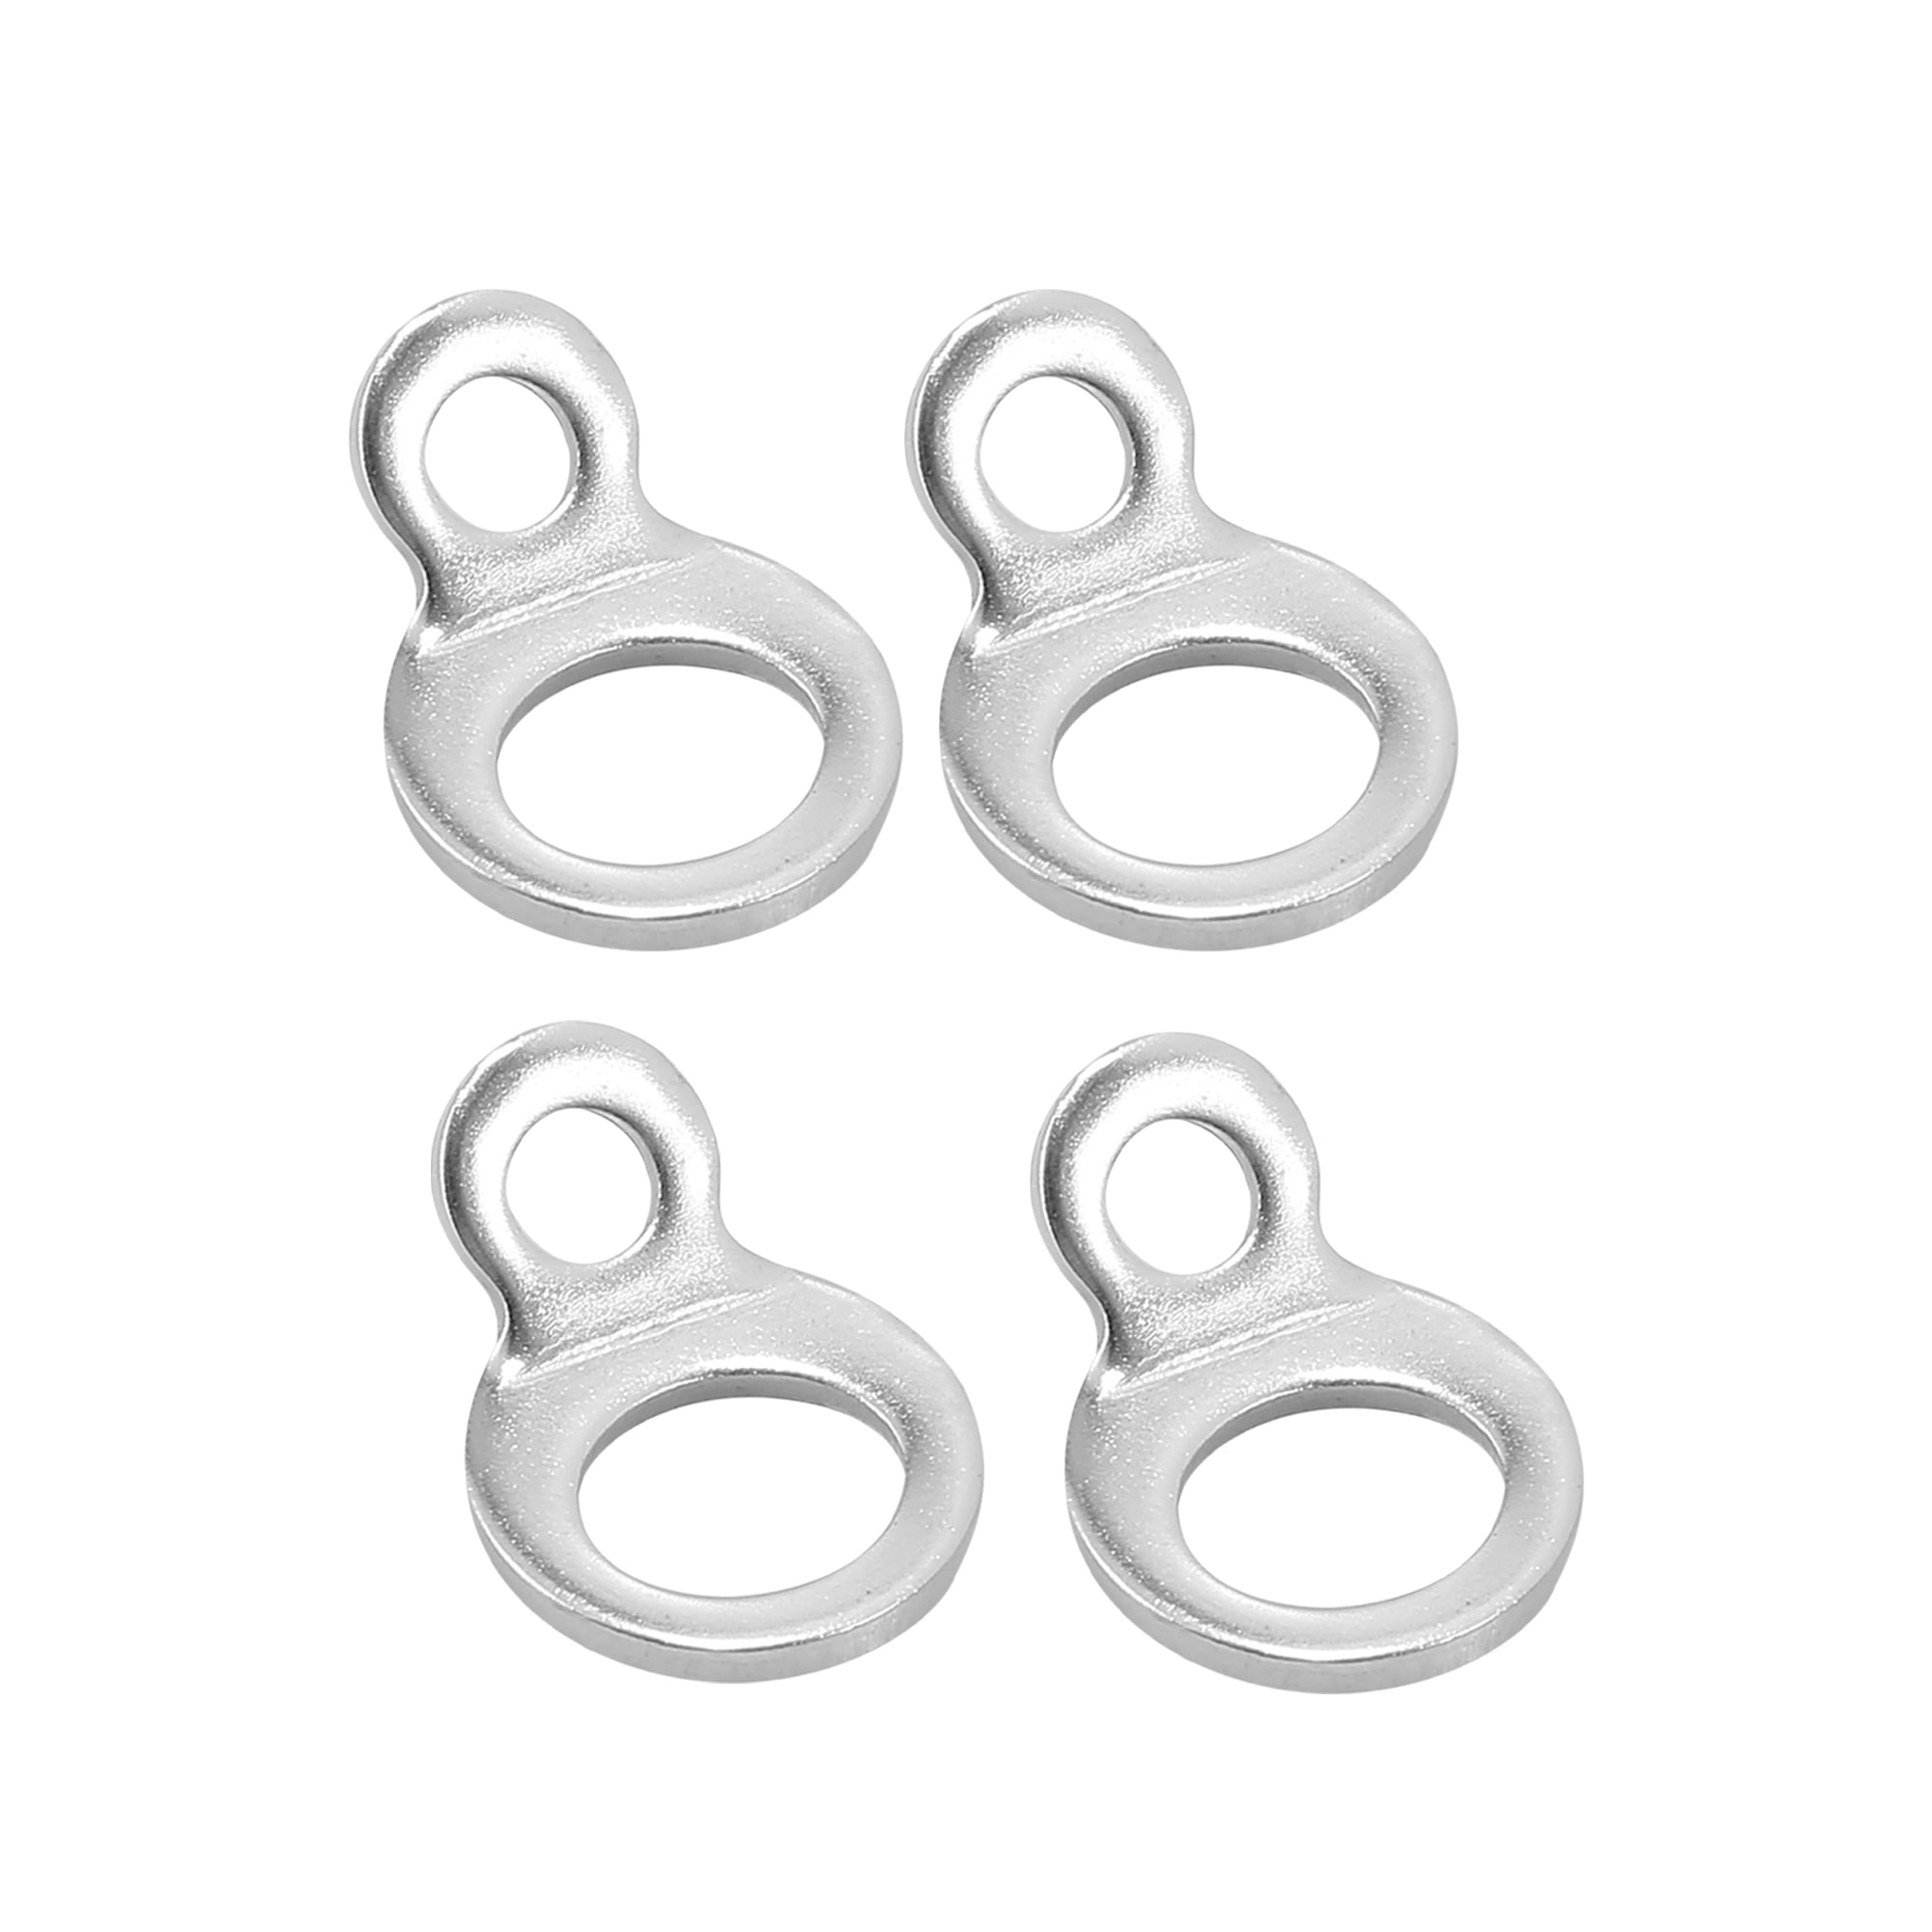 Unique Bargains 4pcs Stainless Steel Tie Down Anchors Hooks Strap Rings for  Motorcycle Dirt Bike ATV Trailer Silver Tone 